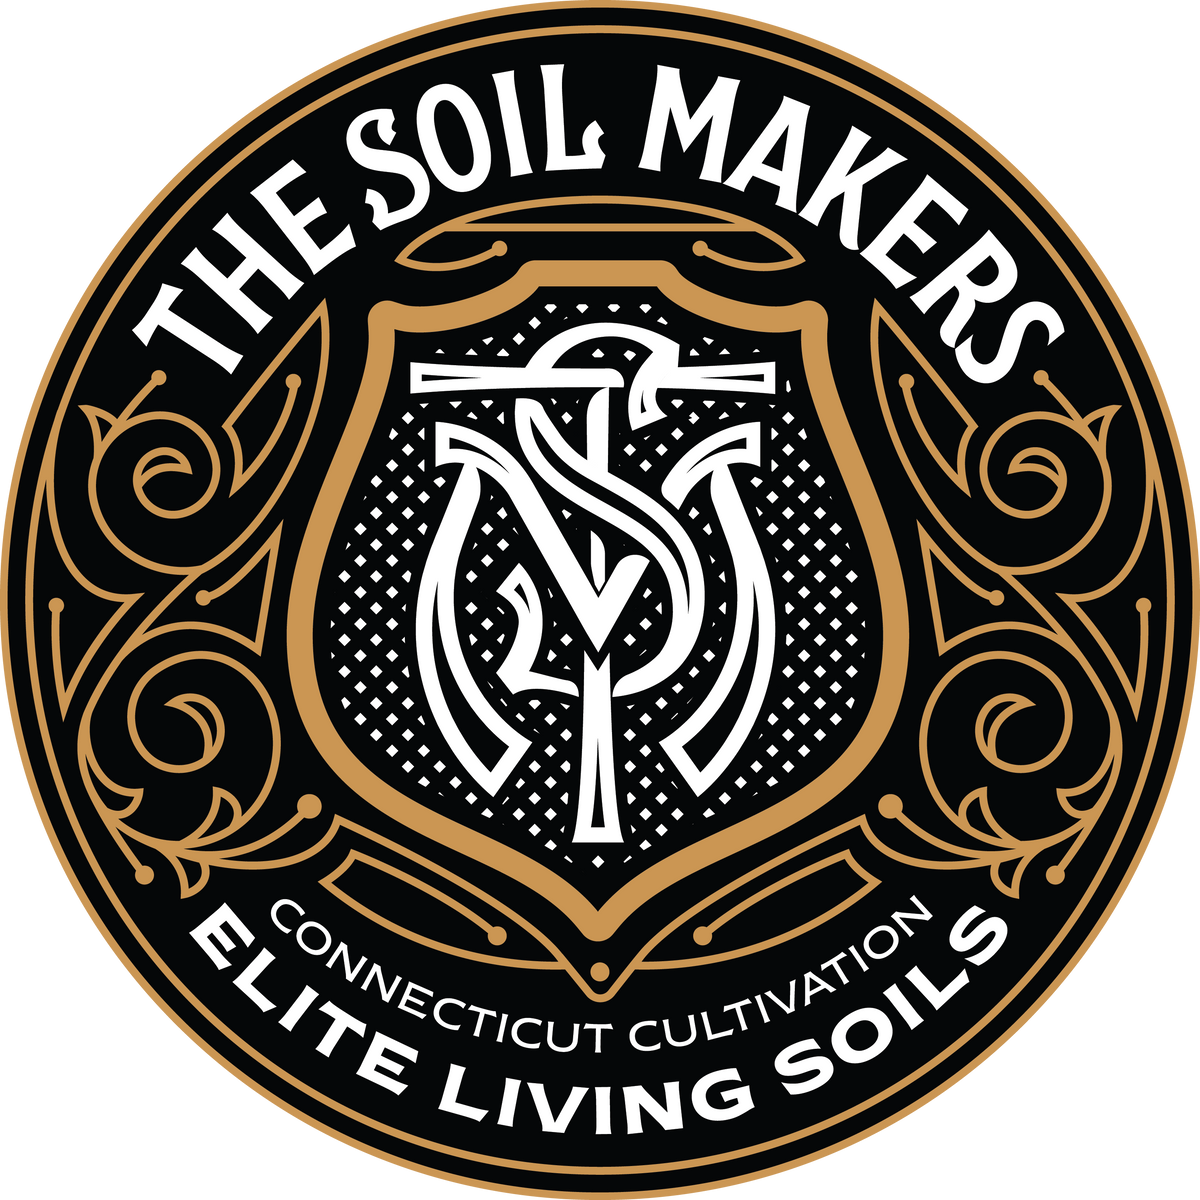 How To Water Organic Living Soil – The Soil Makers